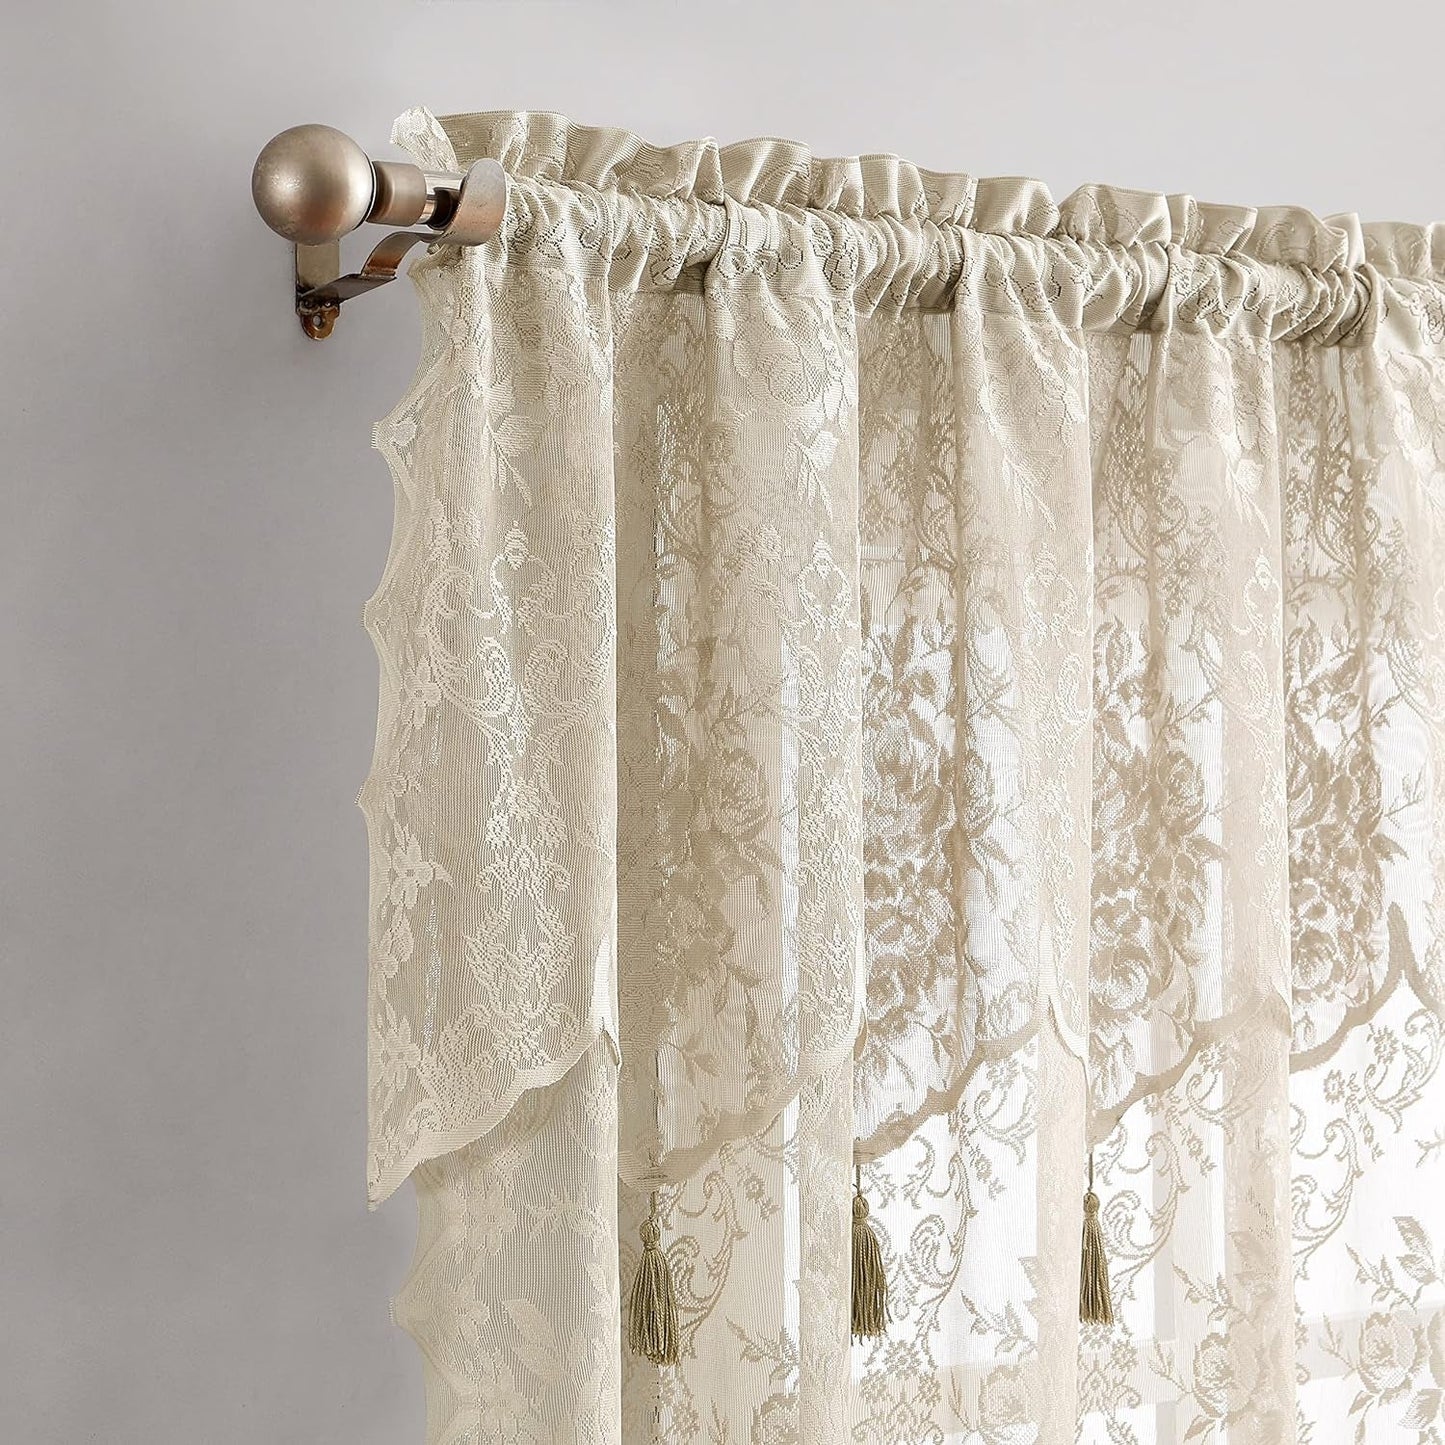 English Rose Design - Lace Semi Sheer Voile Curtain Panels - Voile Valance Rod Pocket with 4 Tassels - for Living Room Bedroom, Bathroom (1 Valance 54" W X 22" L Each, Linen)